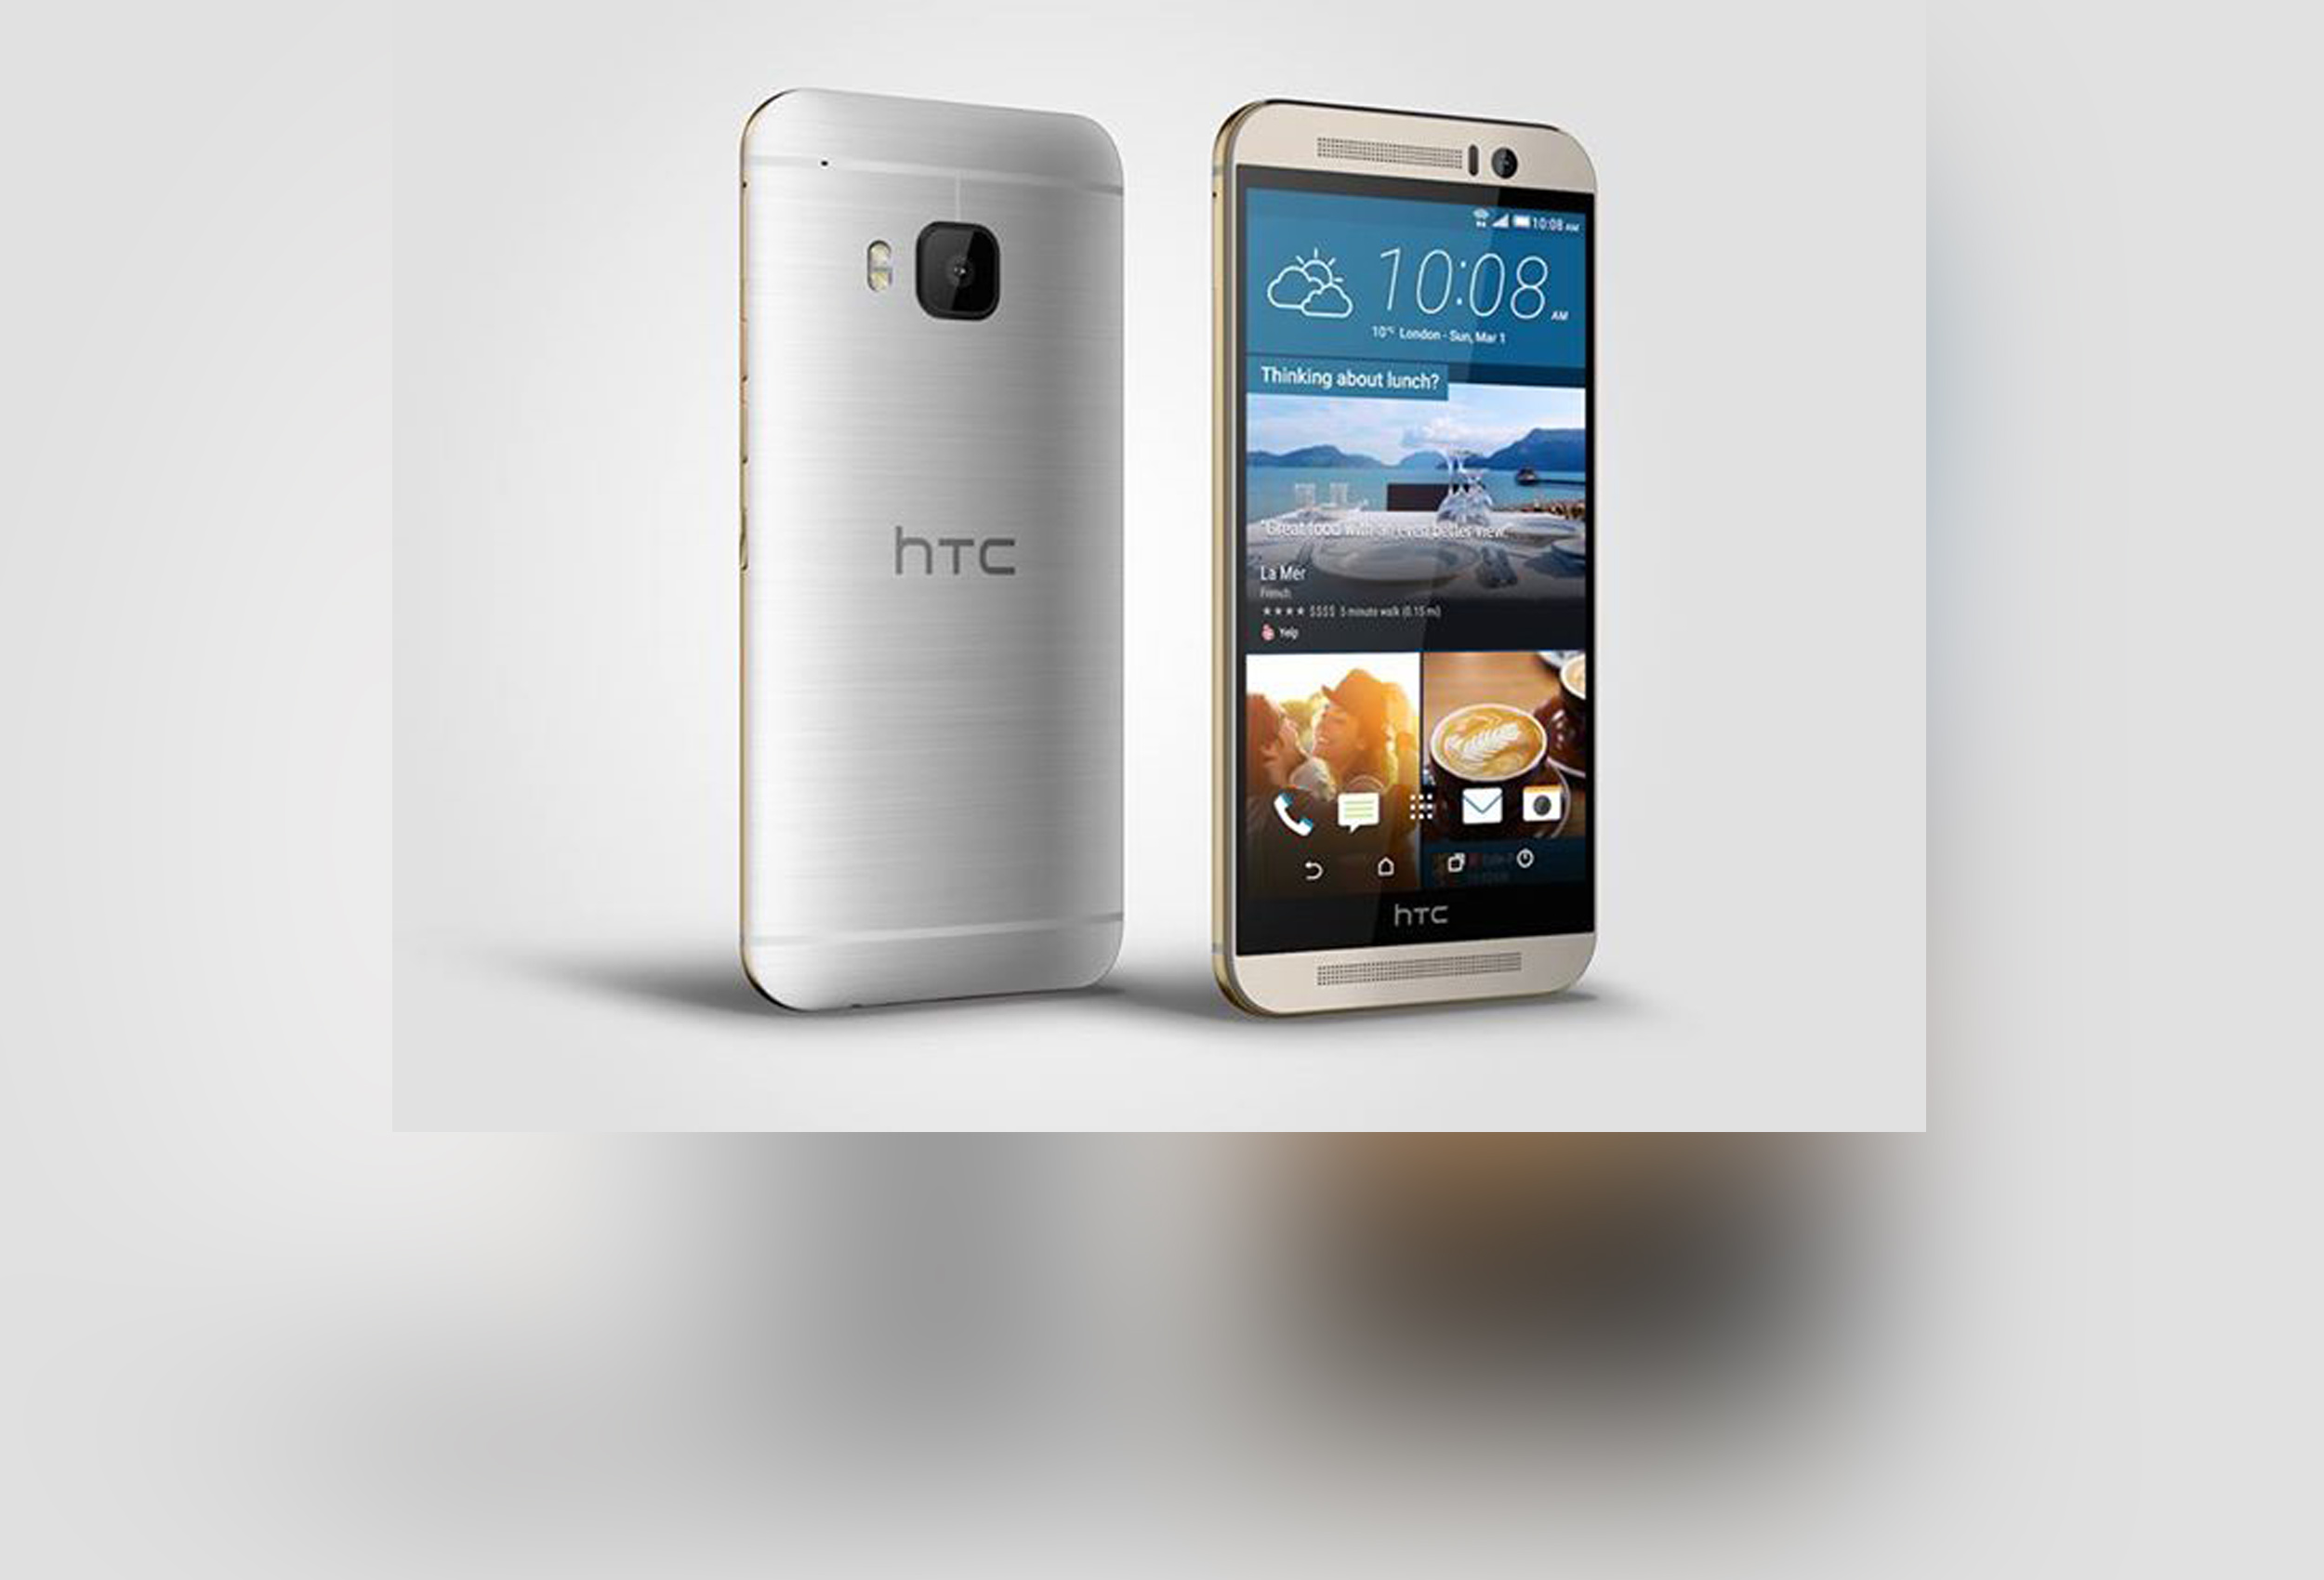 PHOTO: HTC announced the release of their new One M9 smartphone with a 20-megapixel camera.